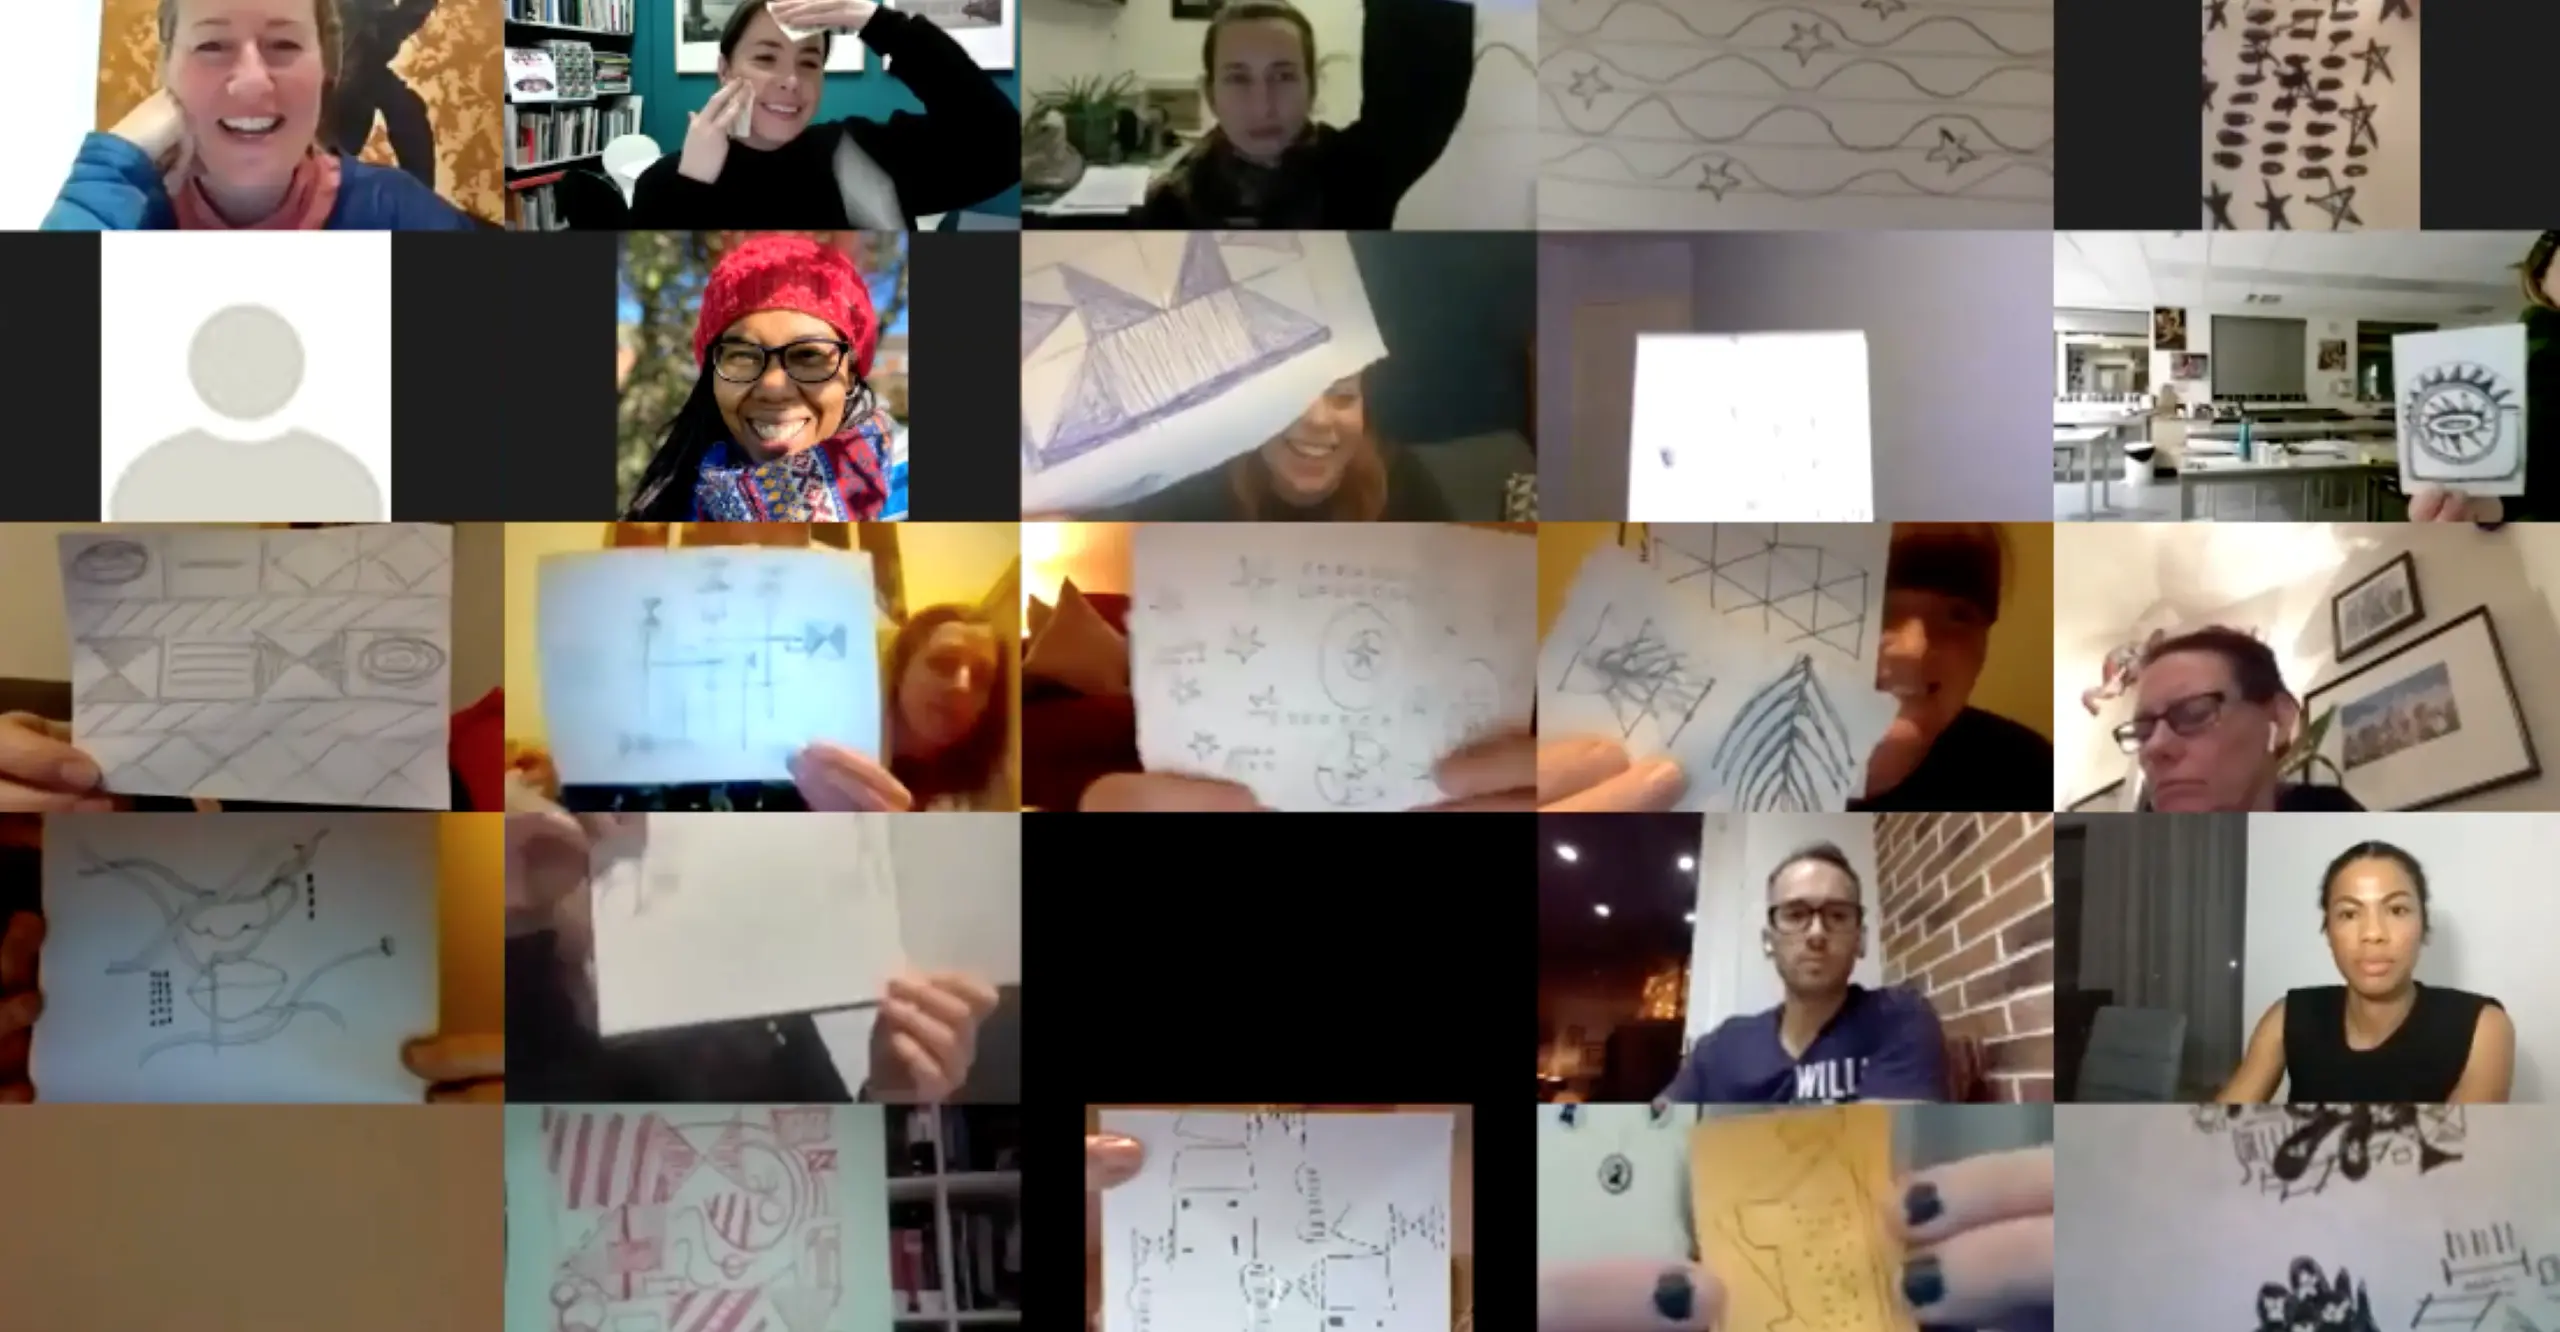 Screenshot from zoom, participants holding up their drawings